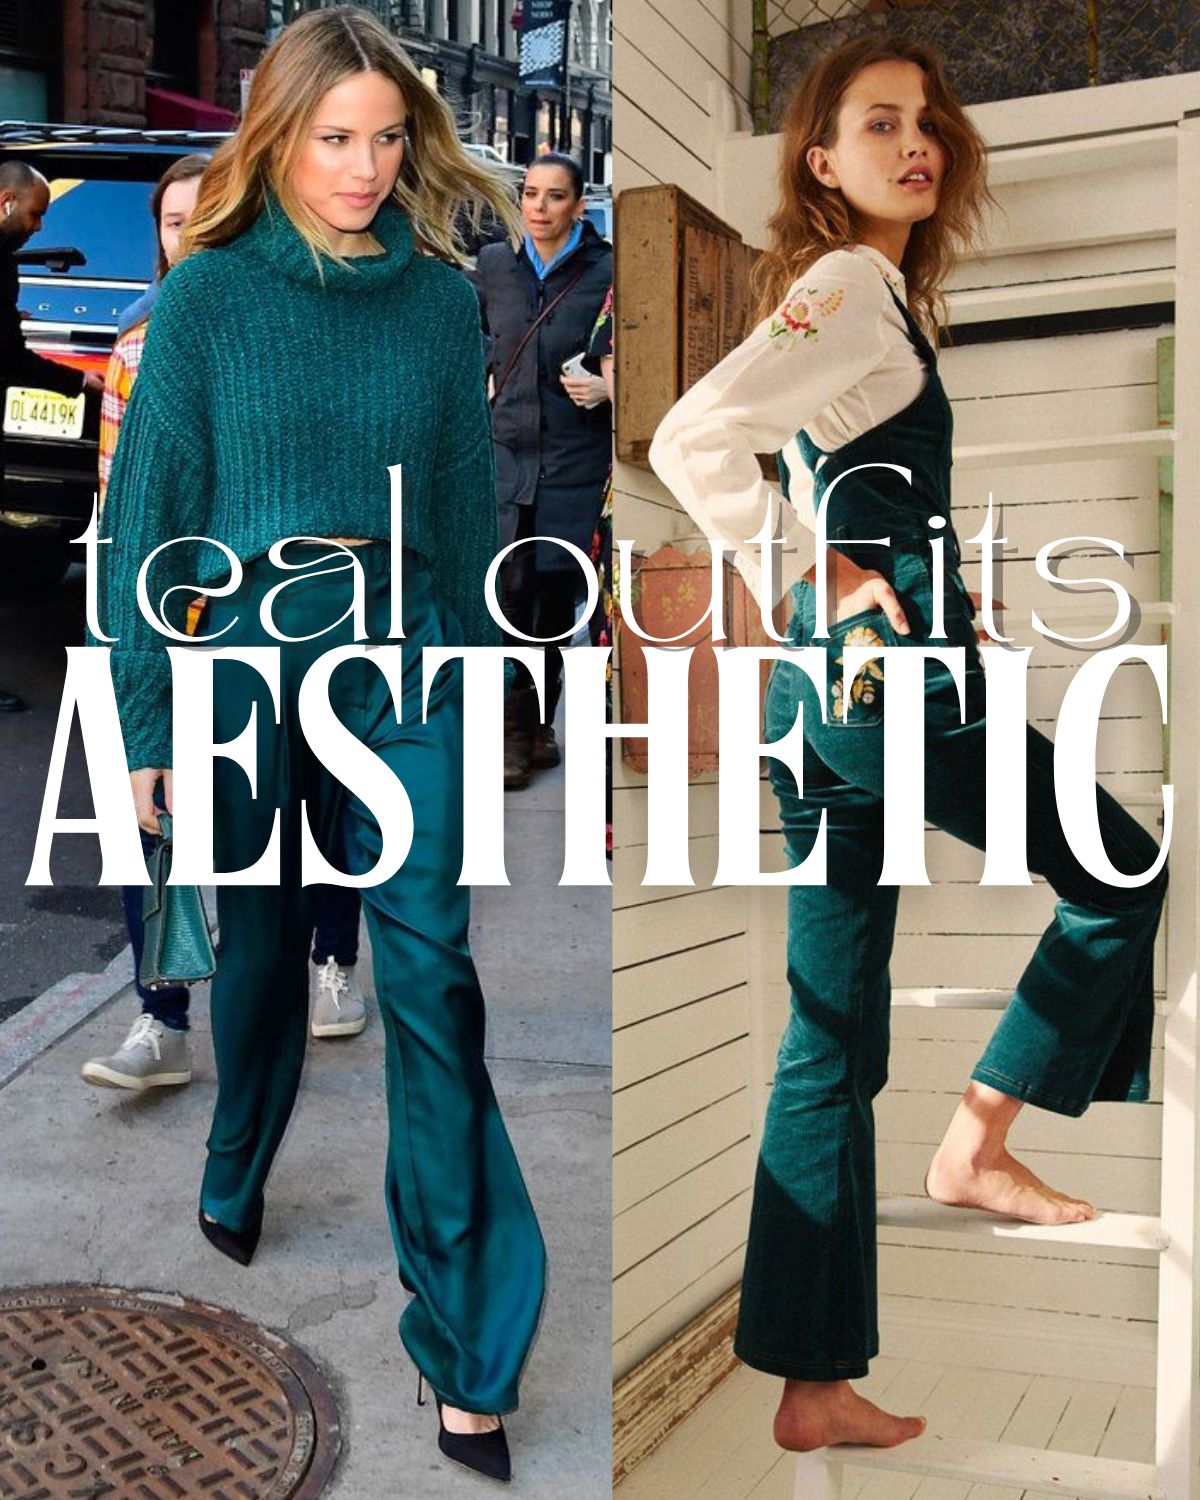 Aesthetic outfits in the color teal